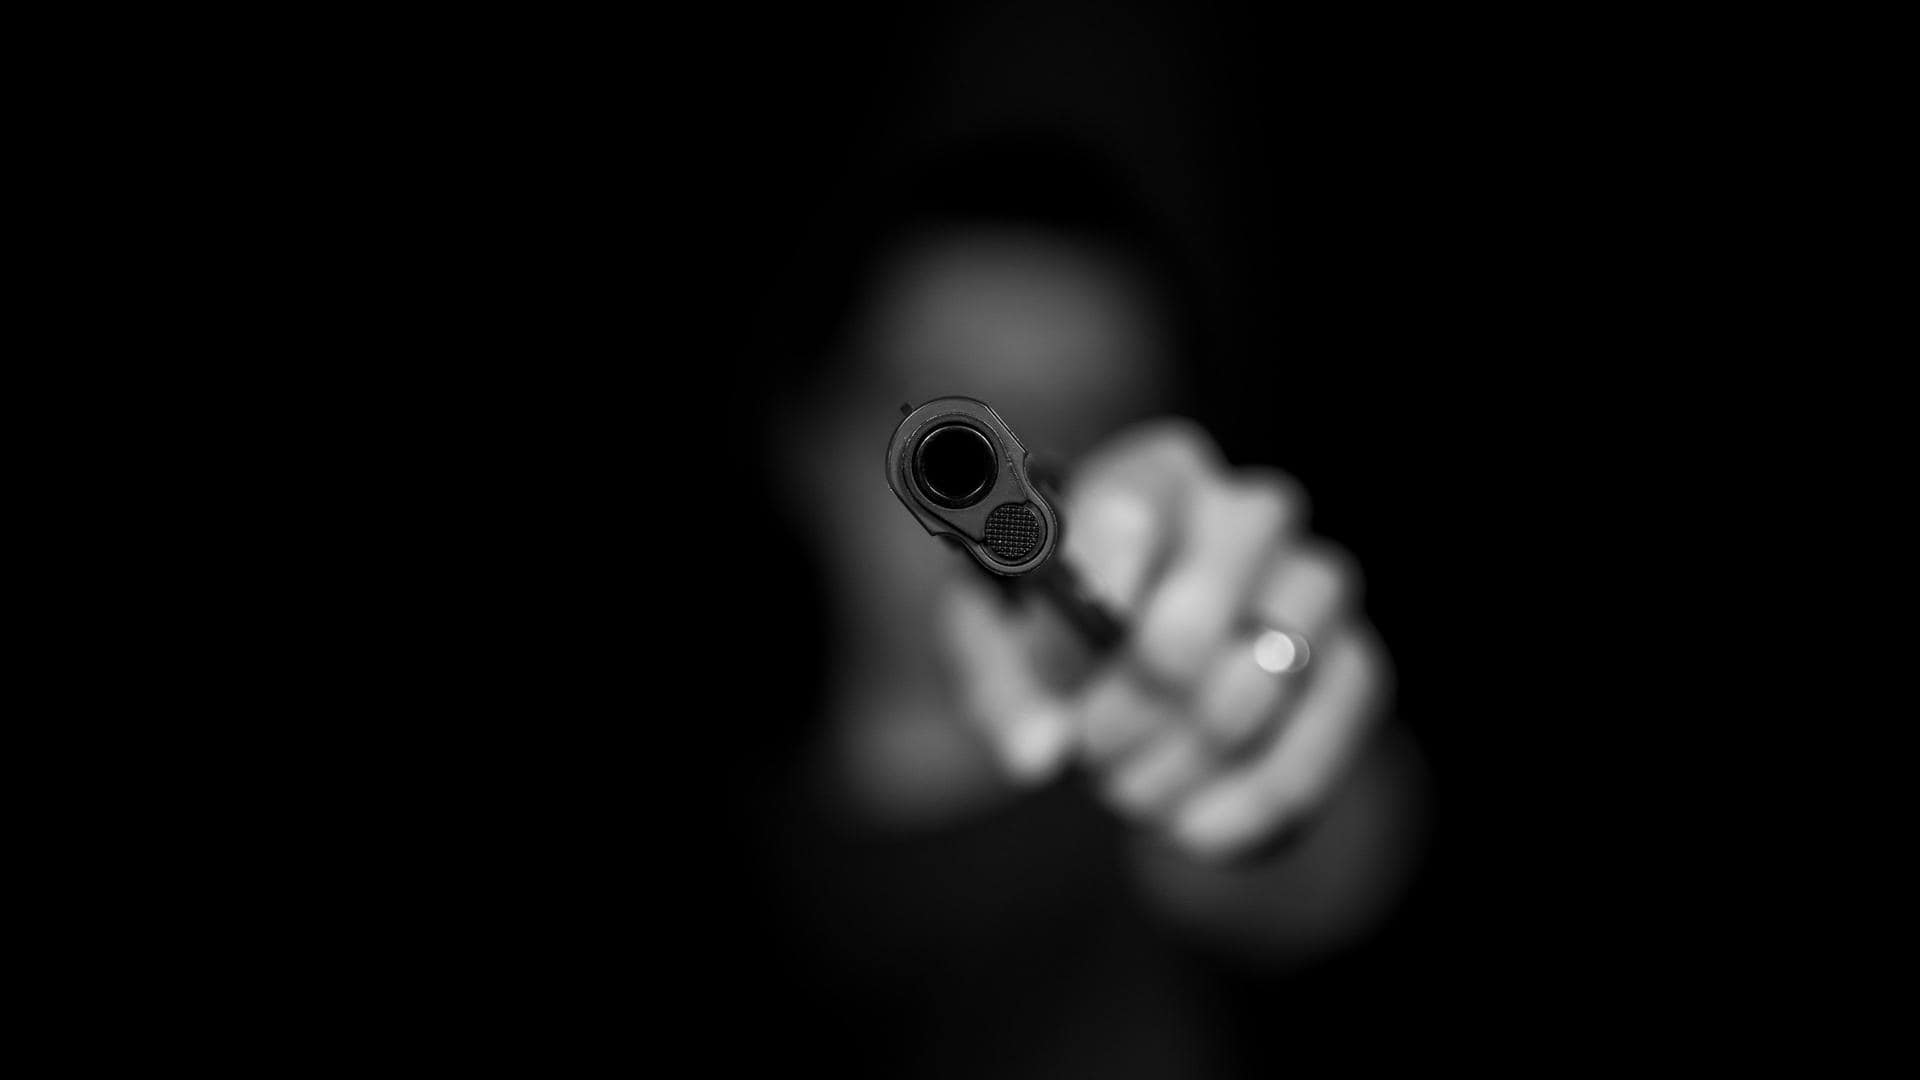 Man, disguised as advocate, shoots at woman in Delhi court 